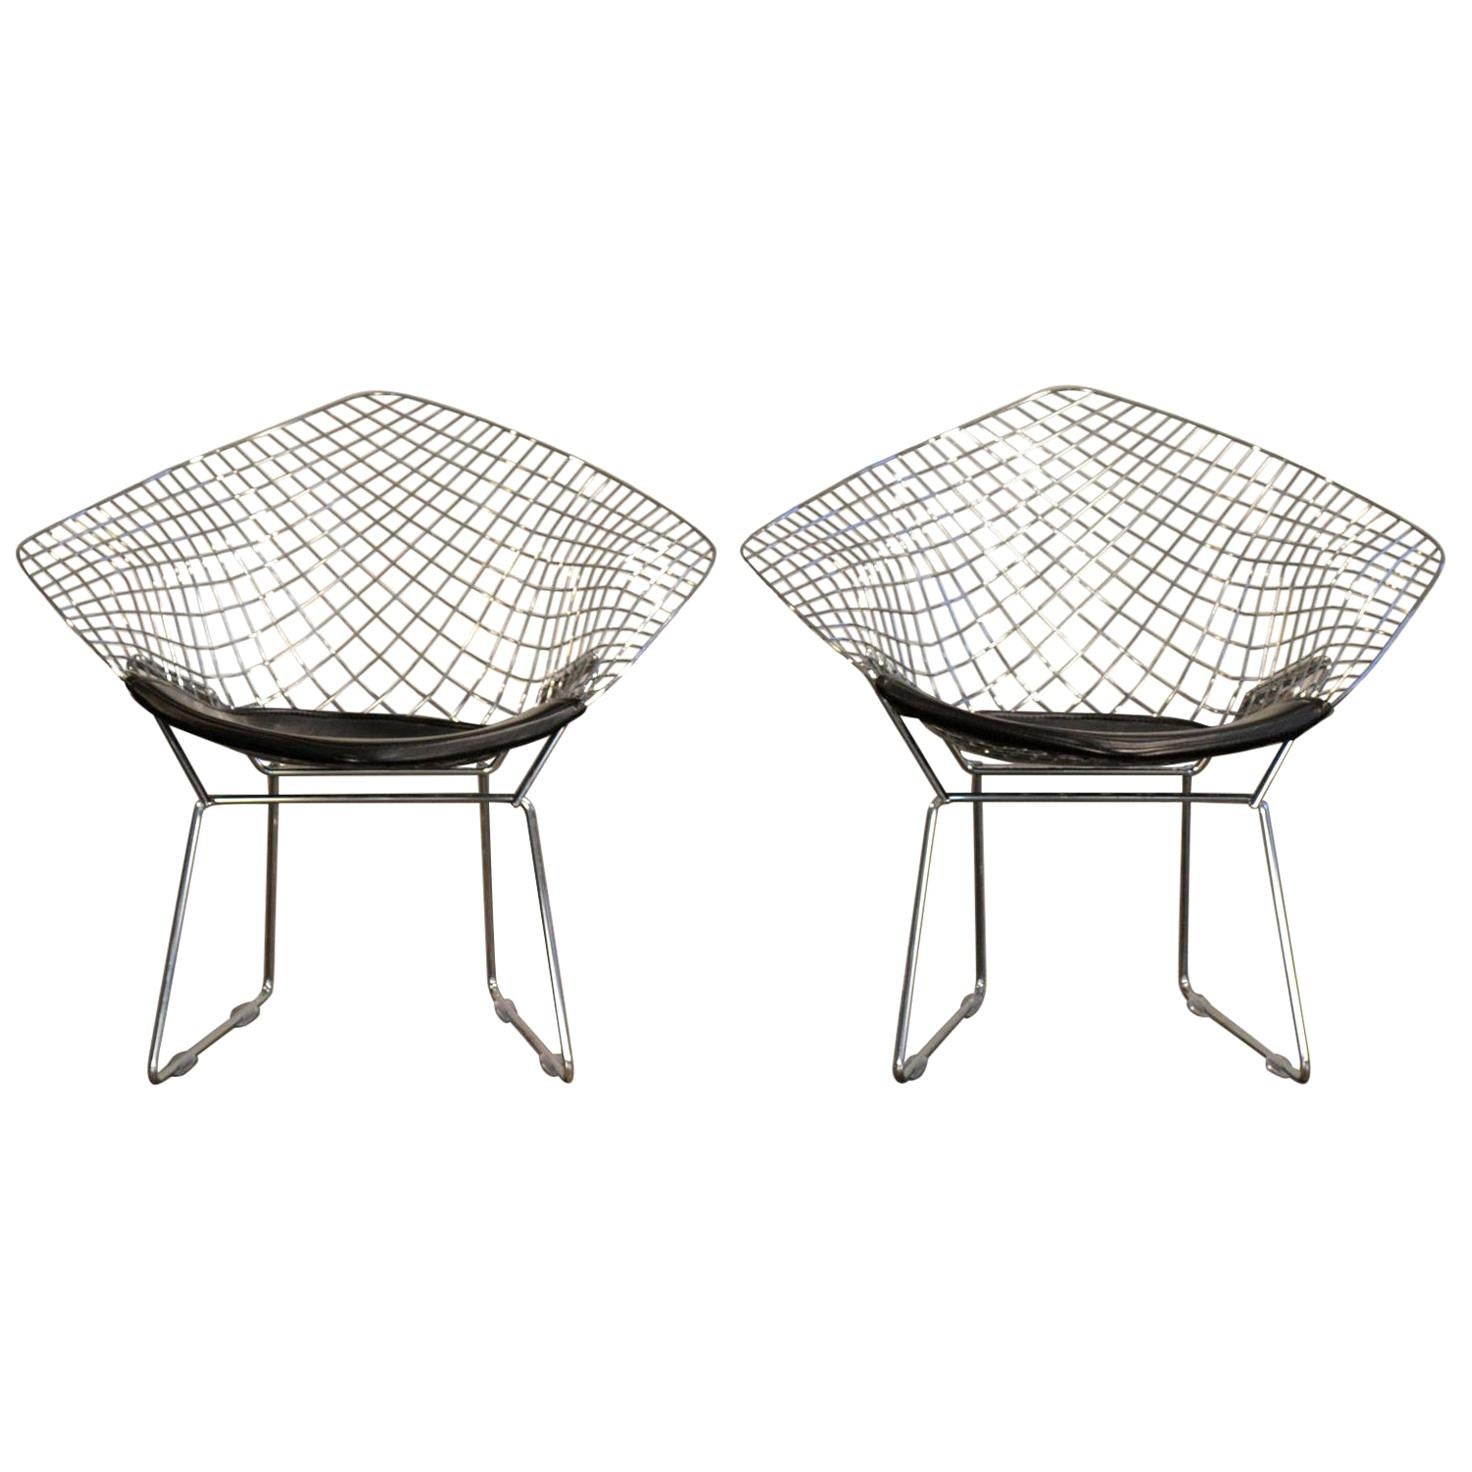 Harry Bertoia Chrome Diamond Chairs by Knoll with Black Seat Covers